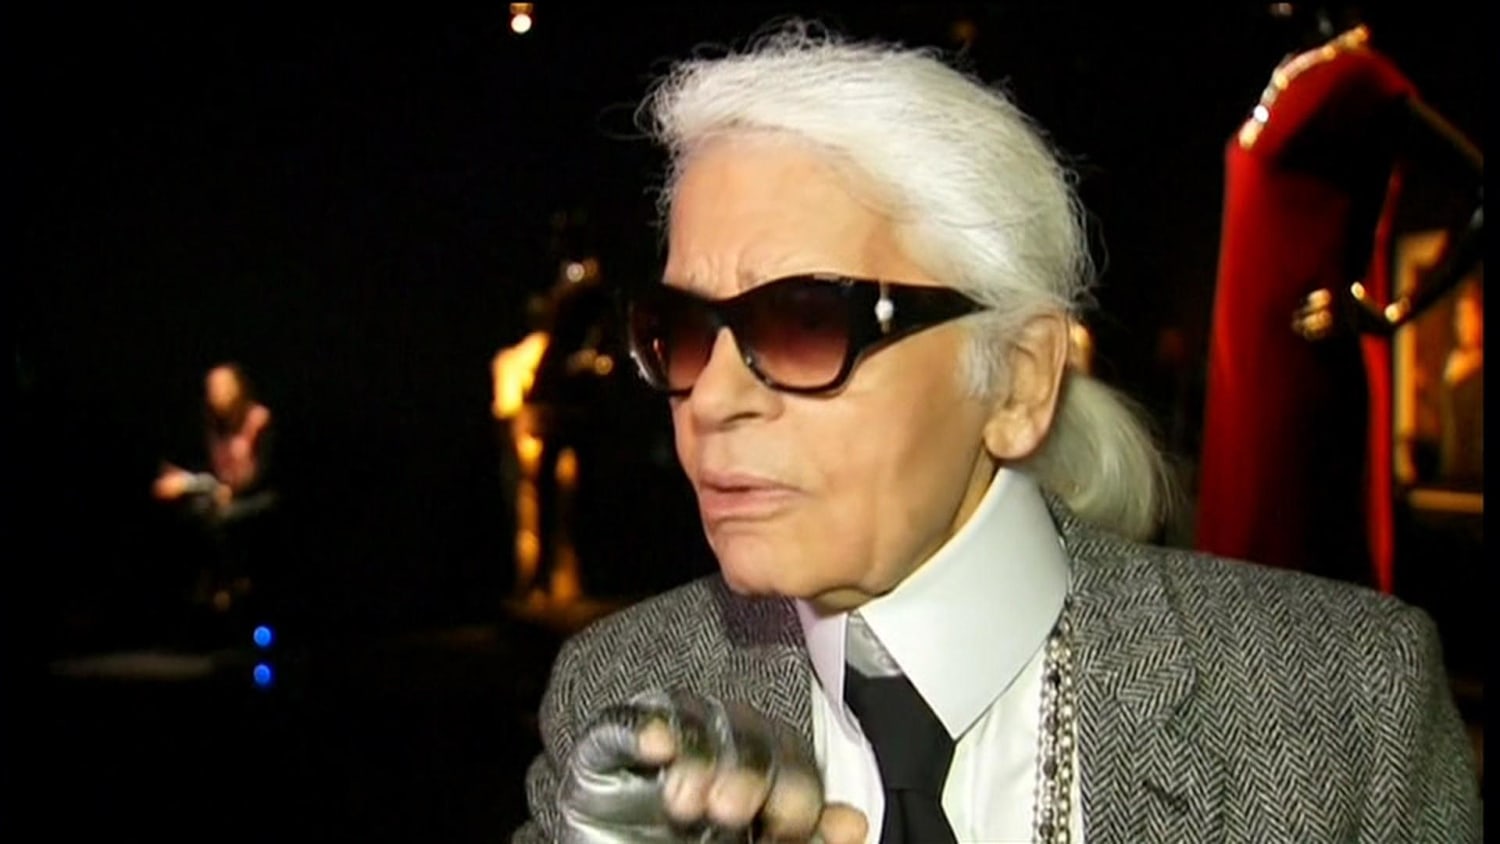 Designer Karl Lagerfeld passed away at the age of 85